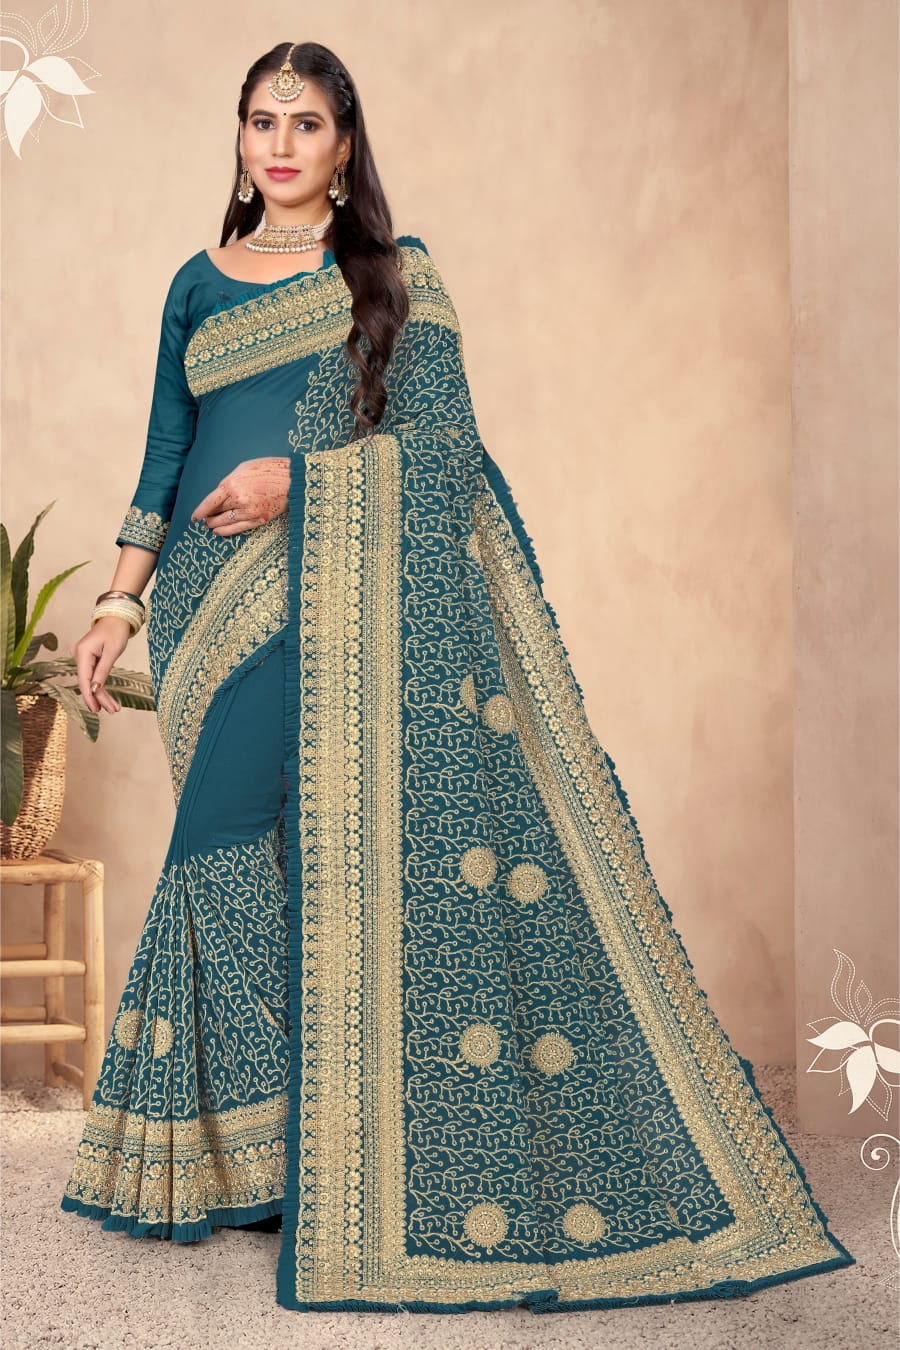 FULL JARI WORK ON PURE GEORGETTE SAREE IN BLUE FOR WEDDING 